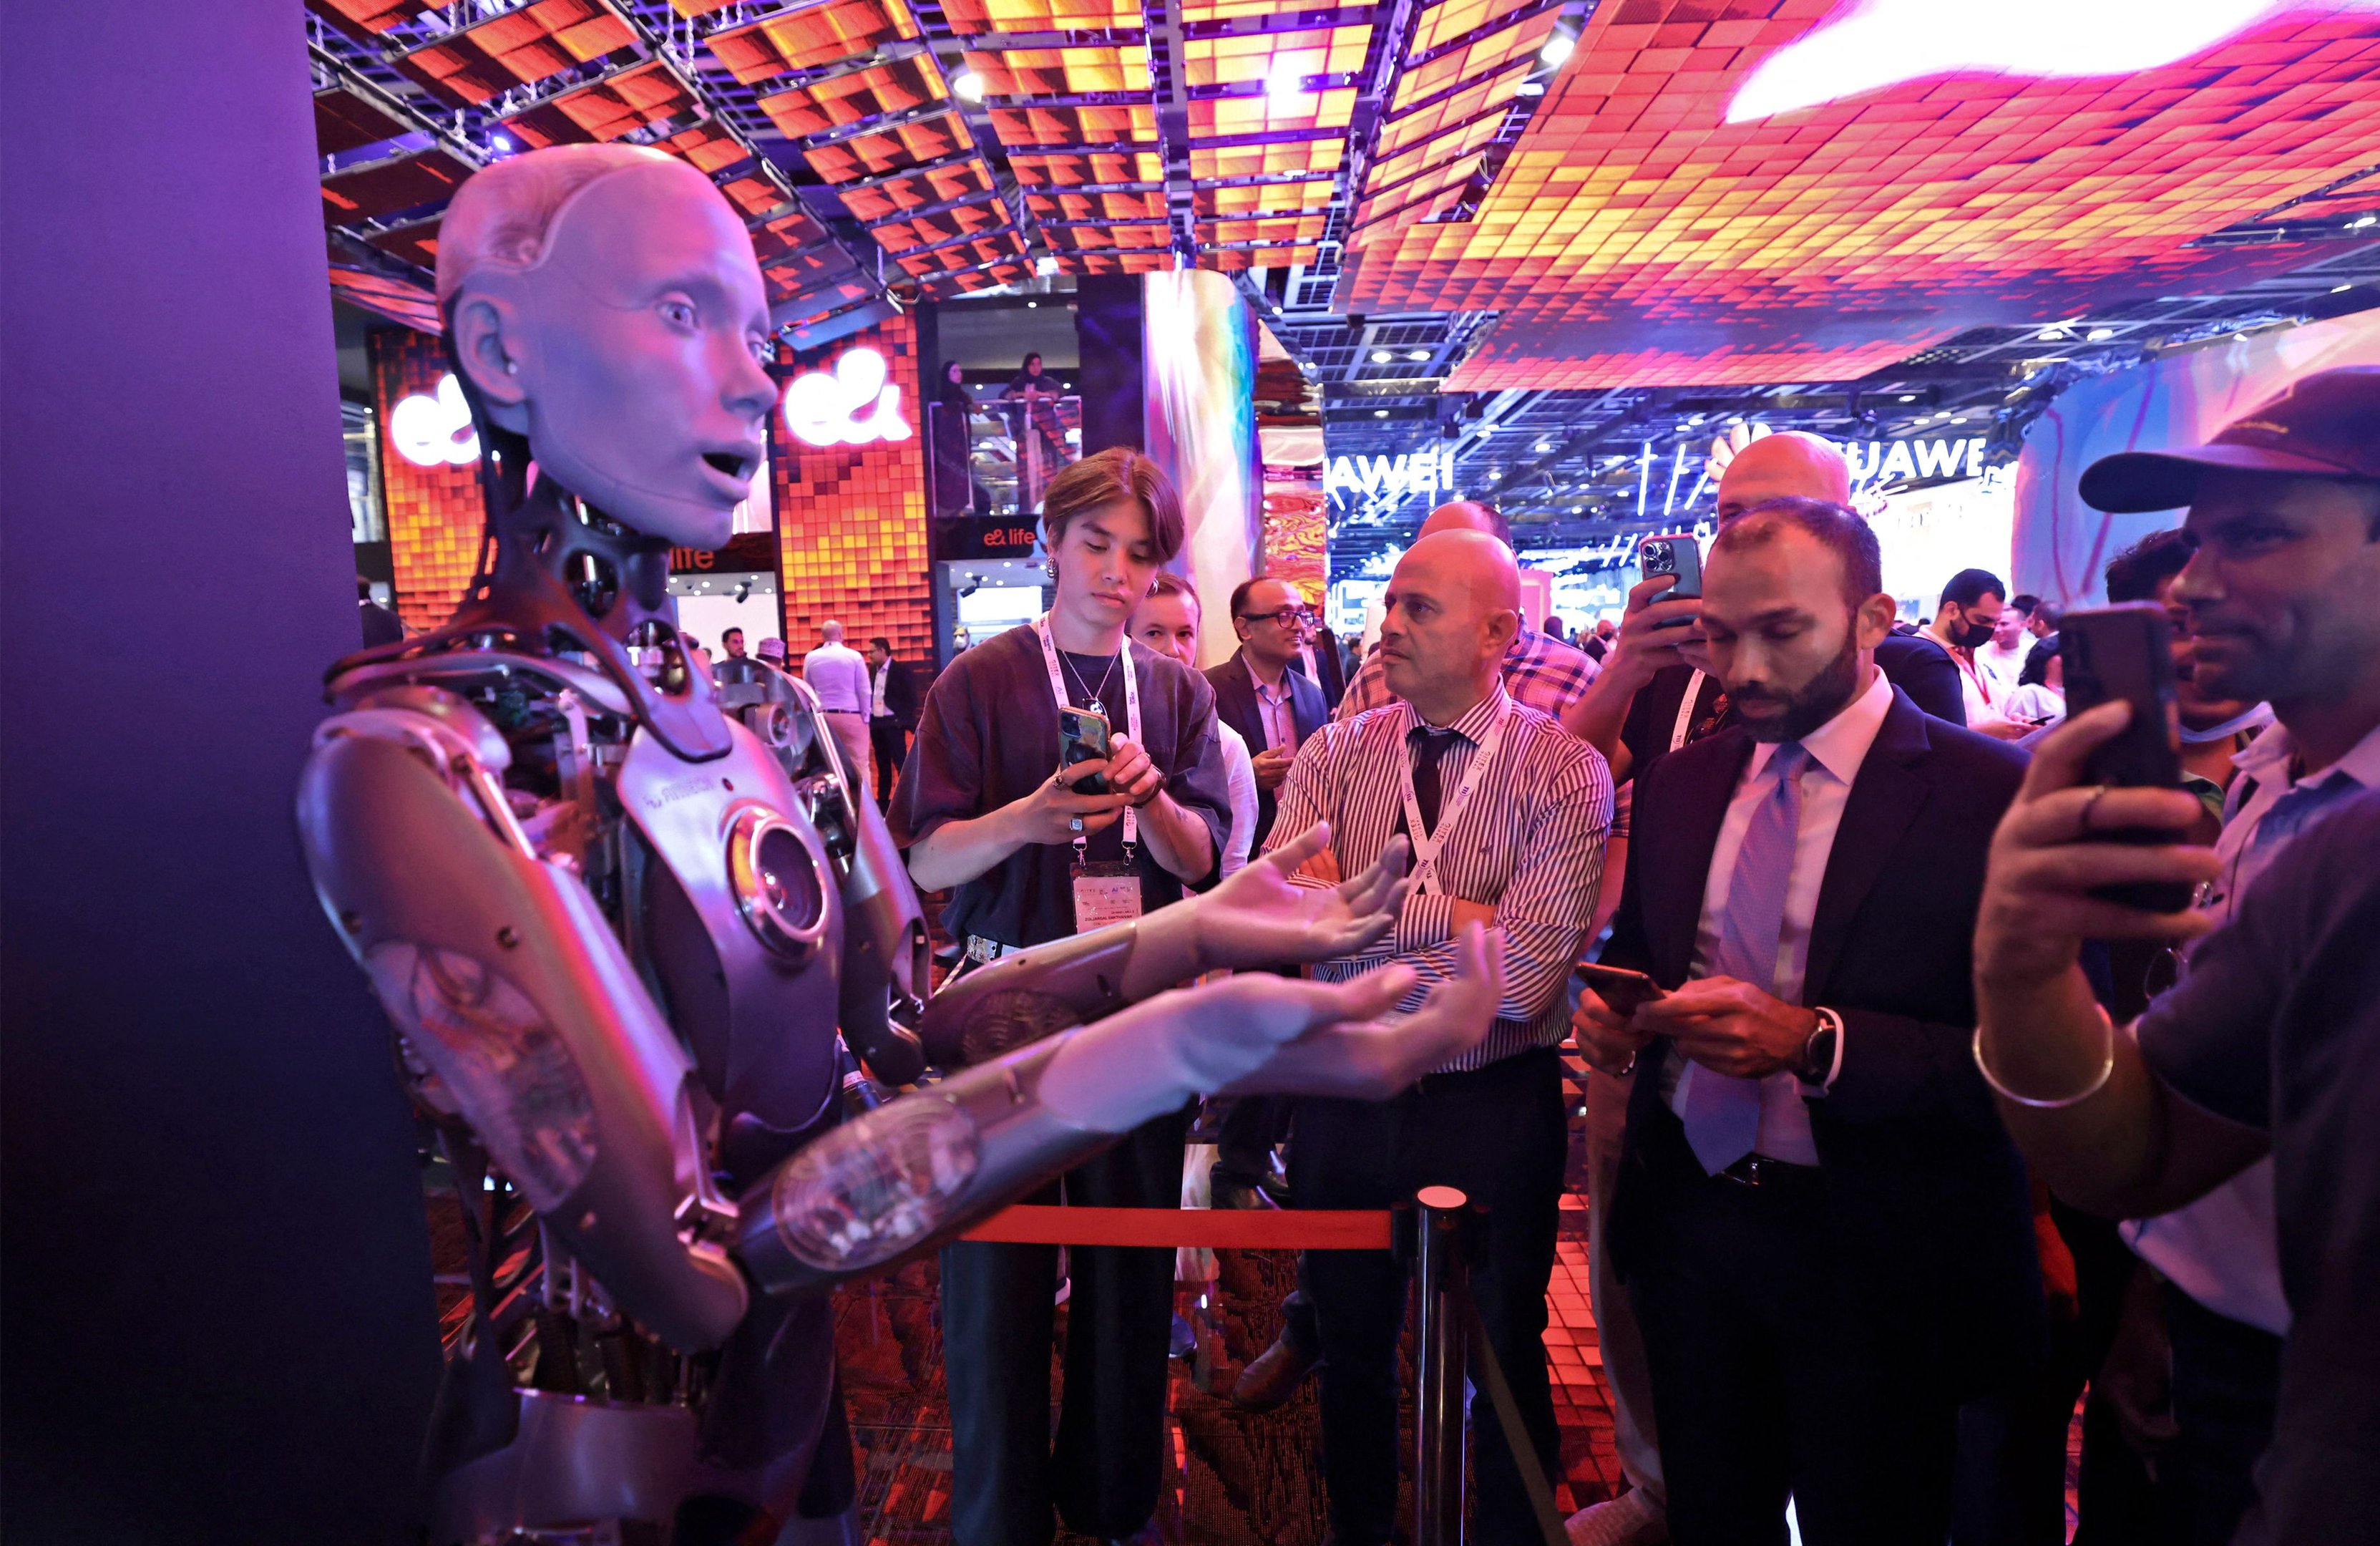 The Ameca humanoid robot greets visitors during the GITEX Global technology show at the Dubai World Trade Centre (DWTC) in the Gulf emirate, on October 12, 2022. (Photo by Karim SAHIB / AFP) (Photo by KARIM SAHIB/AFP via Getty Images)